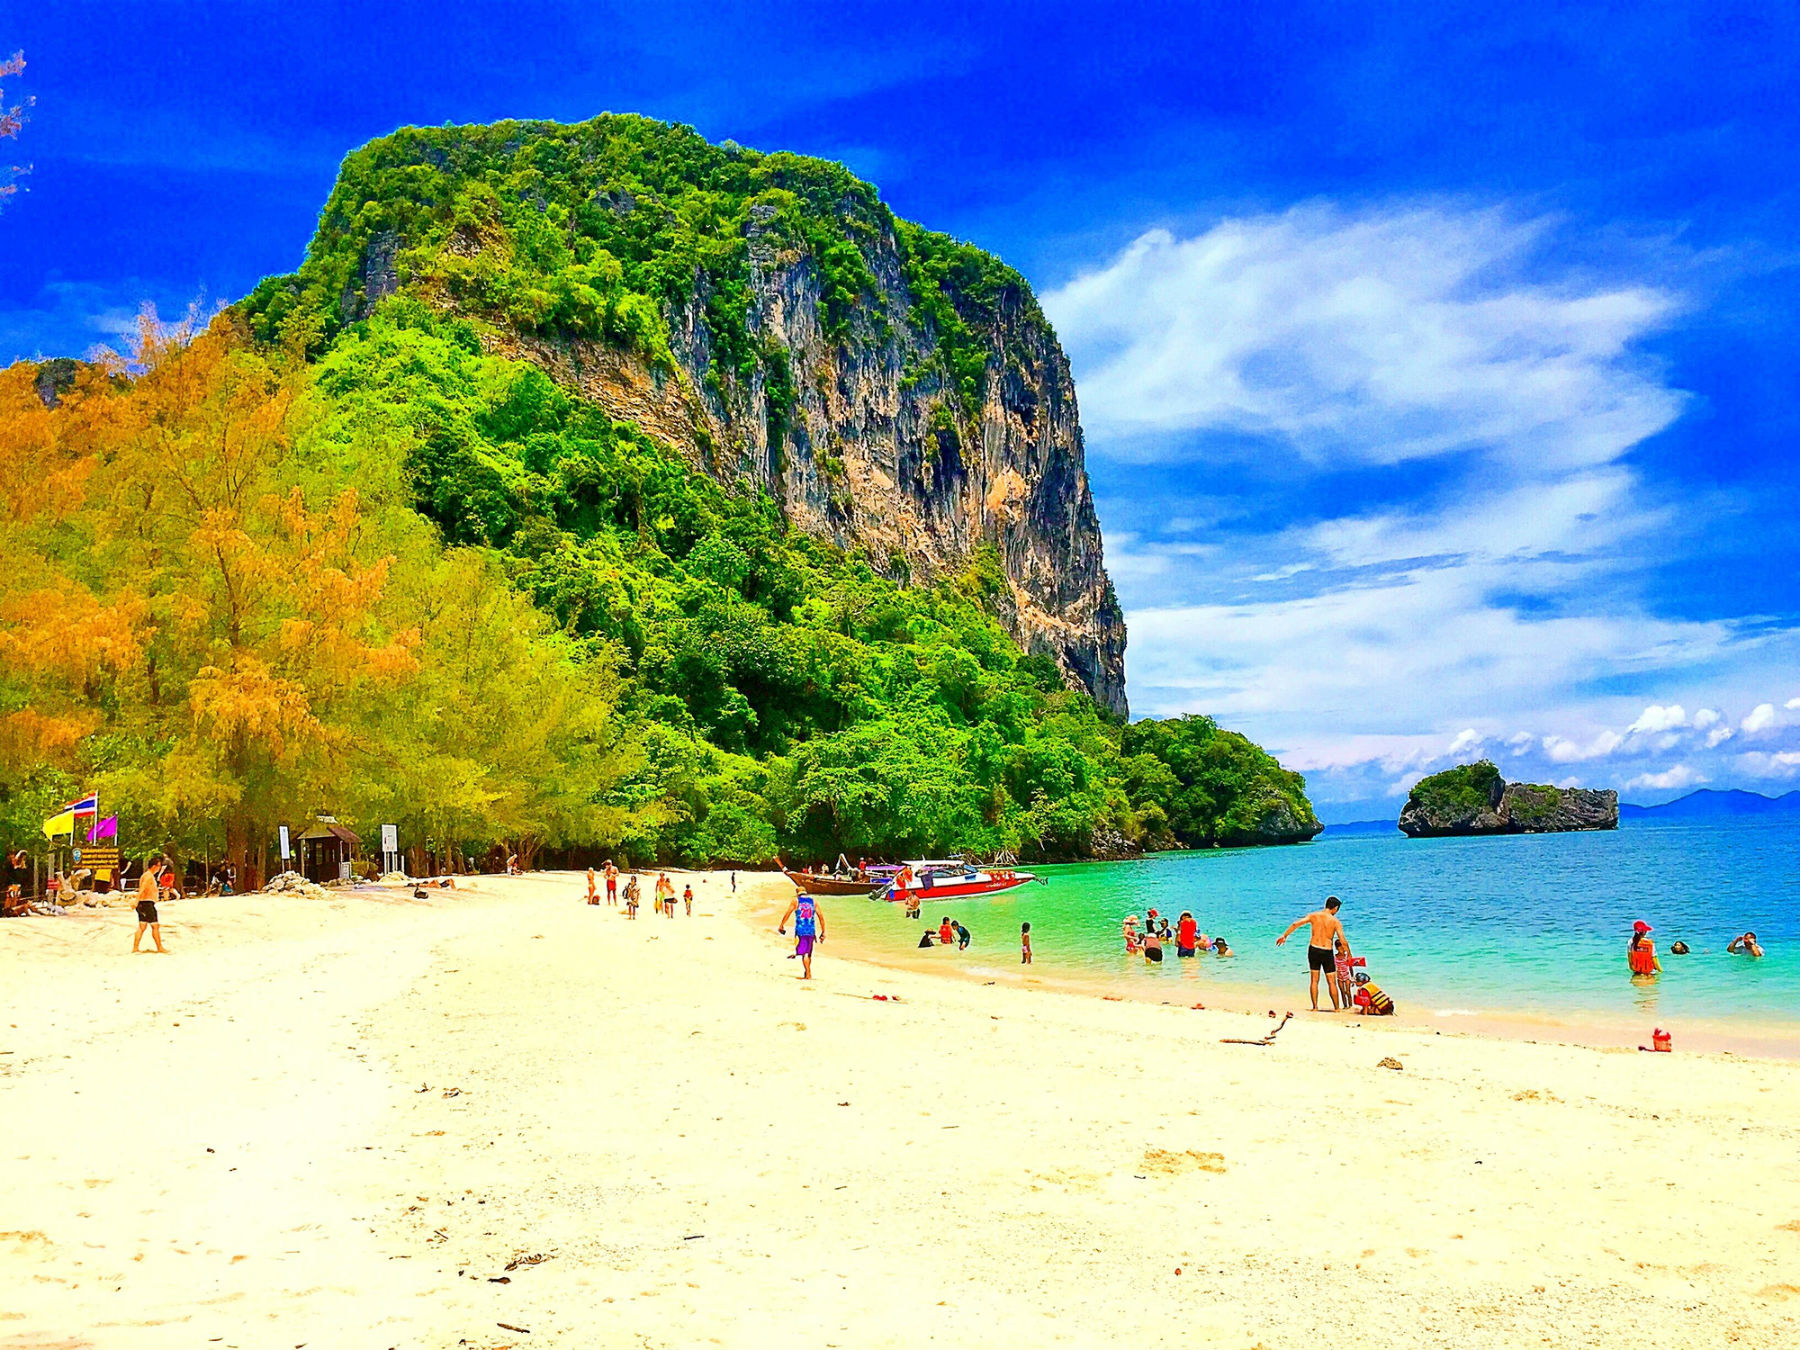 Top 10 Beaches in Thailand Rated by TripAdvisor in 2015